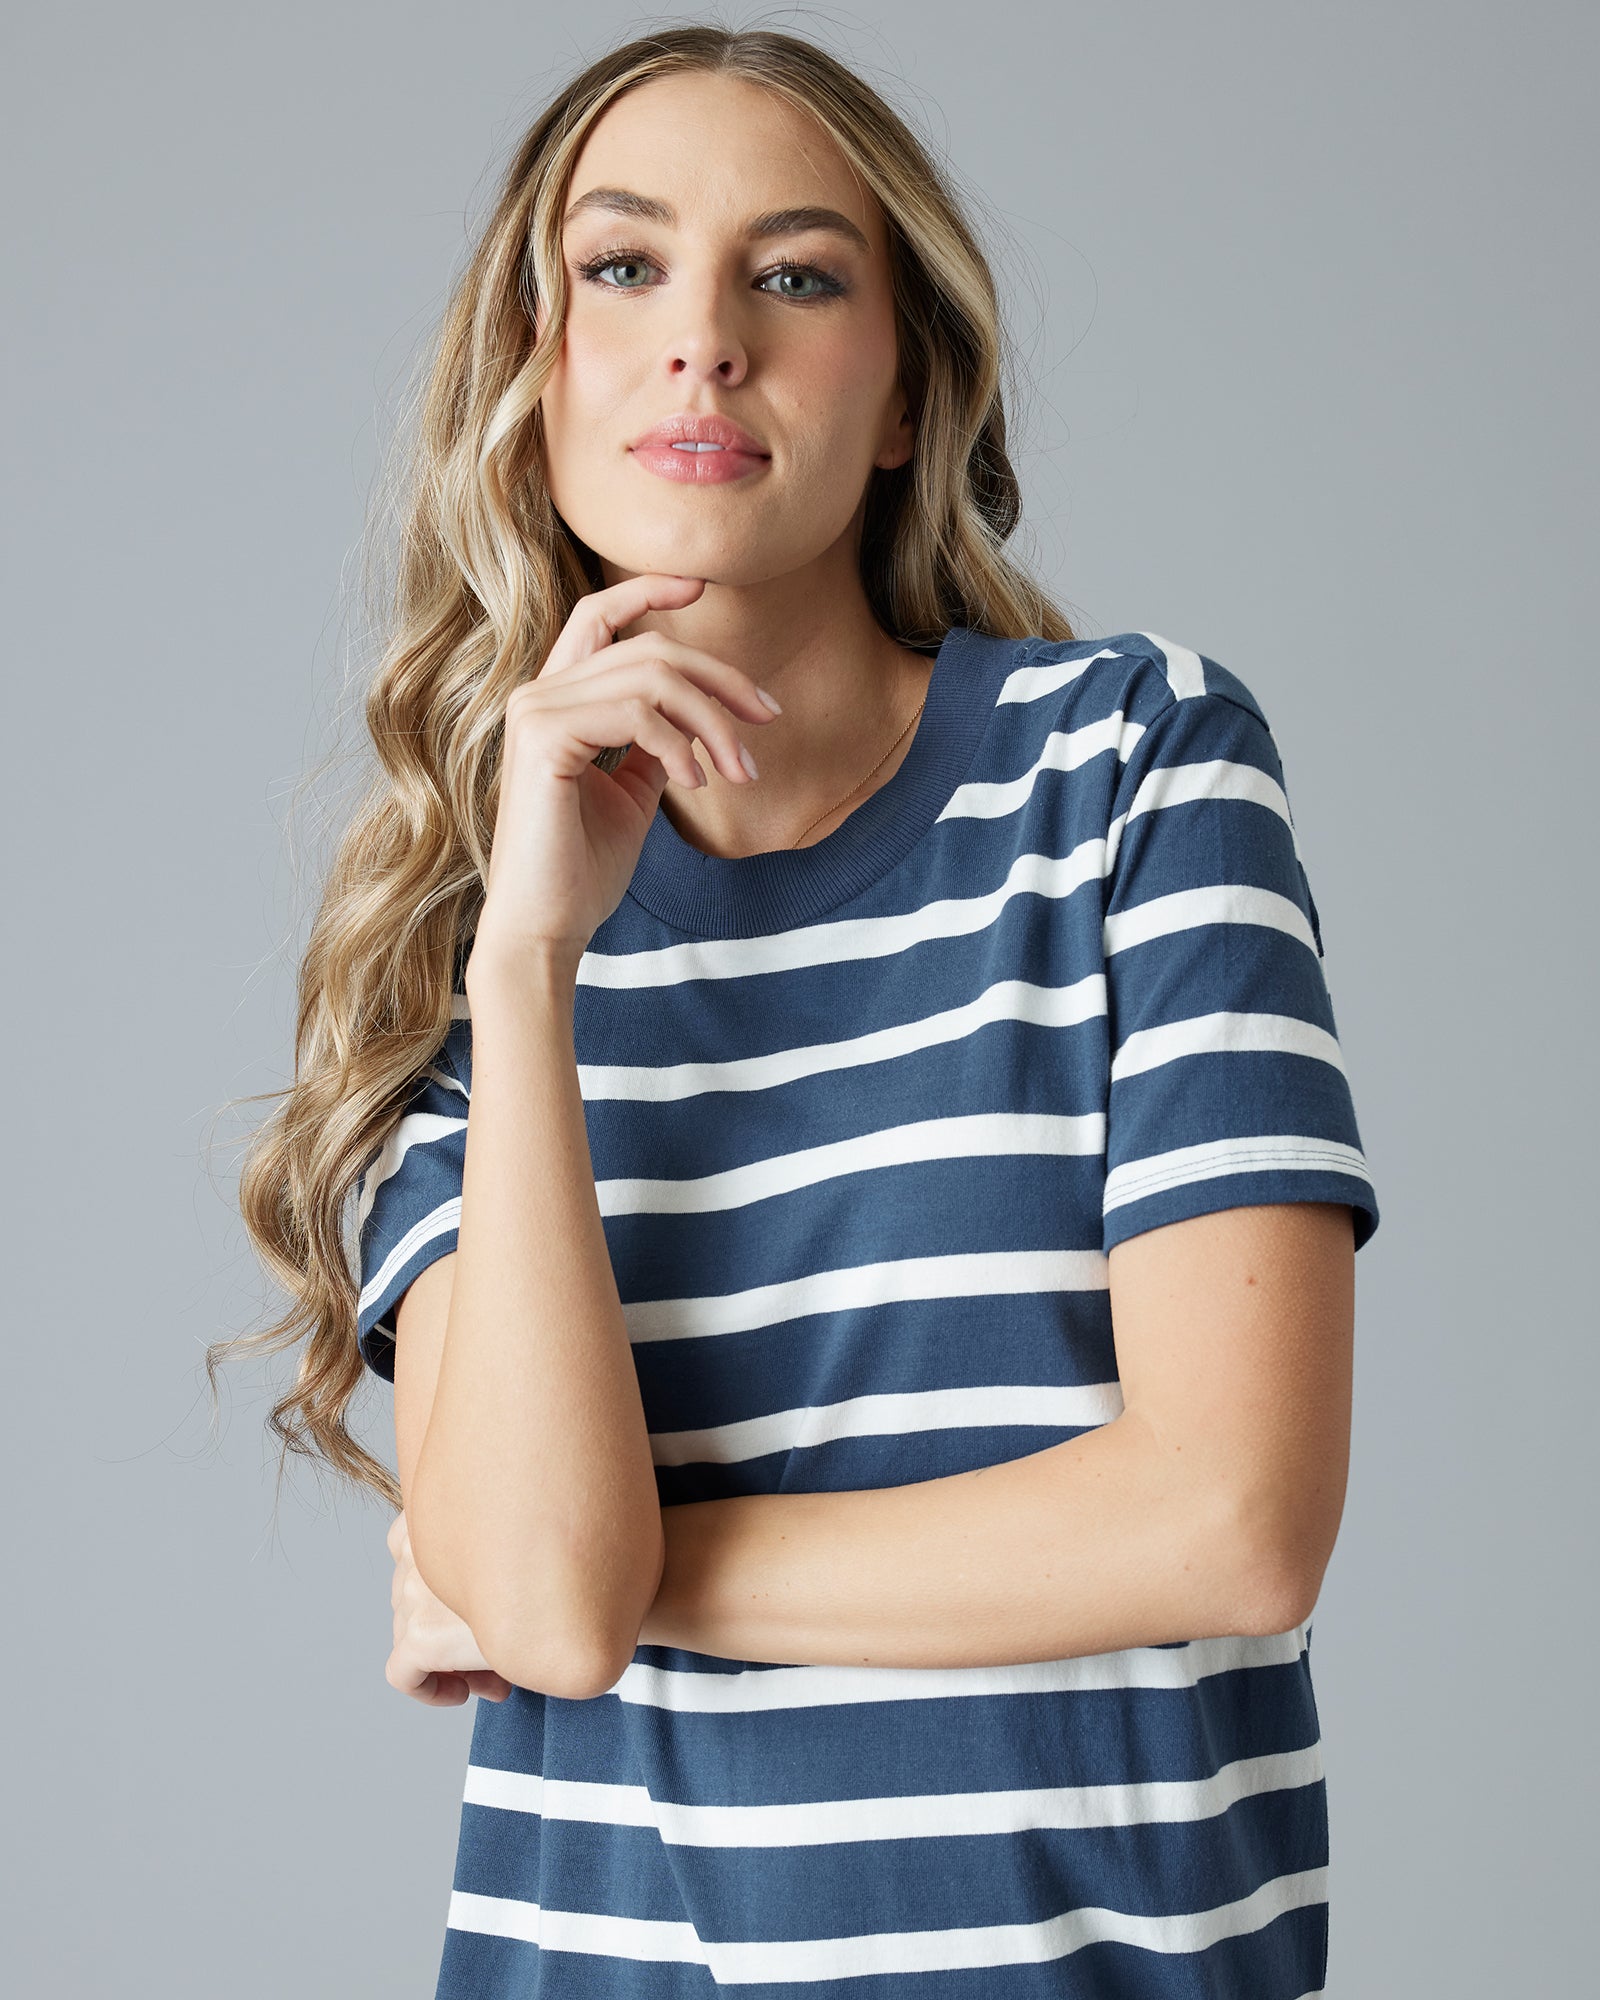 Woman in a navy and white striped short sleeve sheath dress